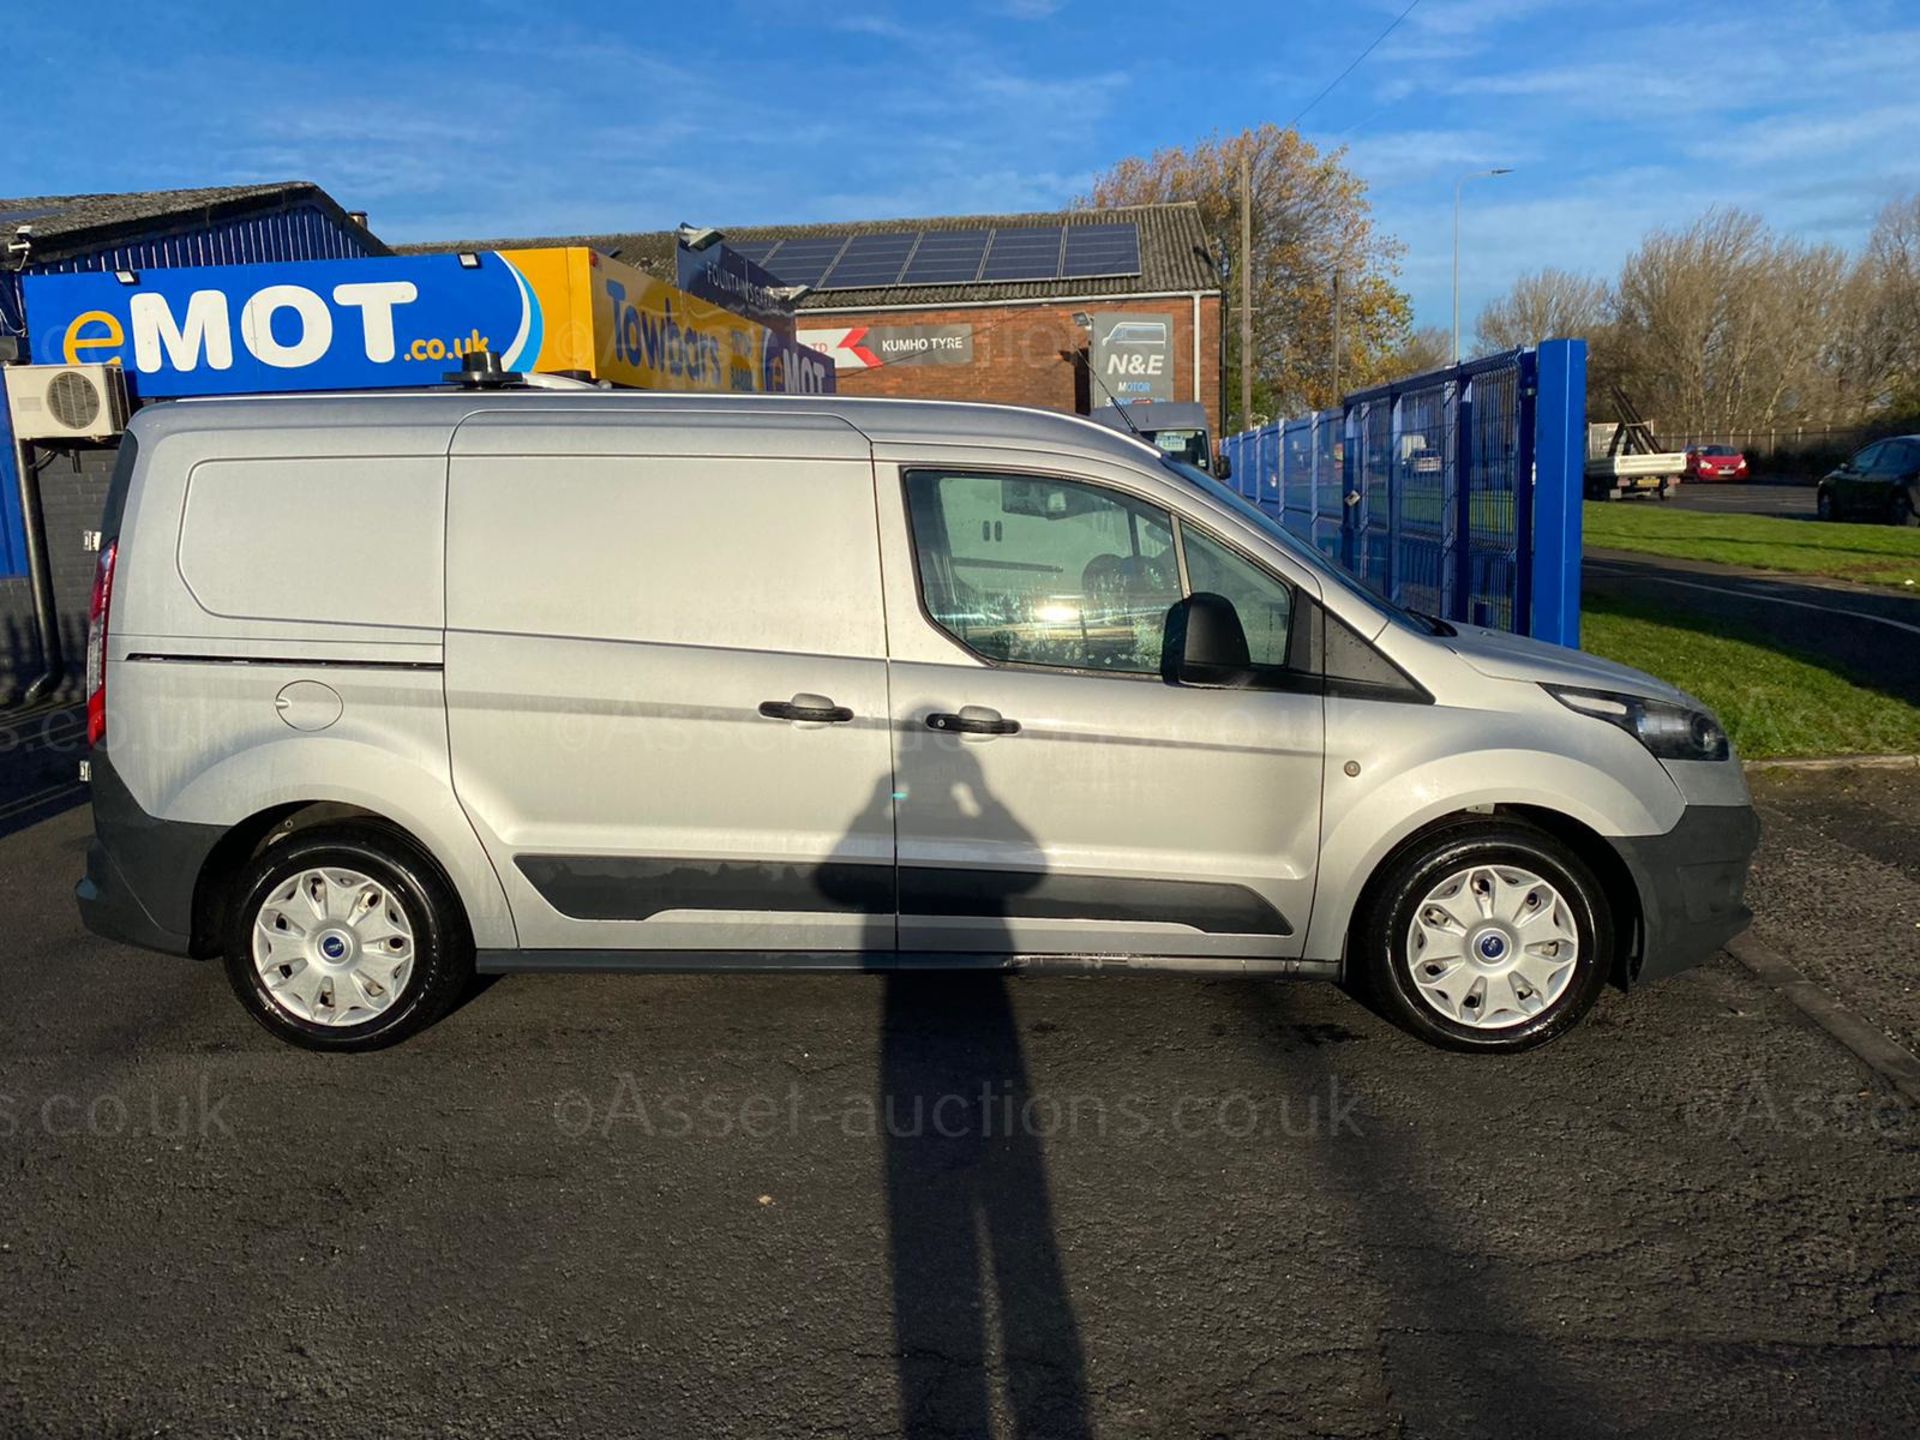 2014/64 FORD TRANSIT CONNECT 240 SILVER LWB DOG VAN, 73K MILES WITH FSH, 2 LARGE DOG CAGES *PLUS VAT - Image 6 of 10